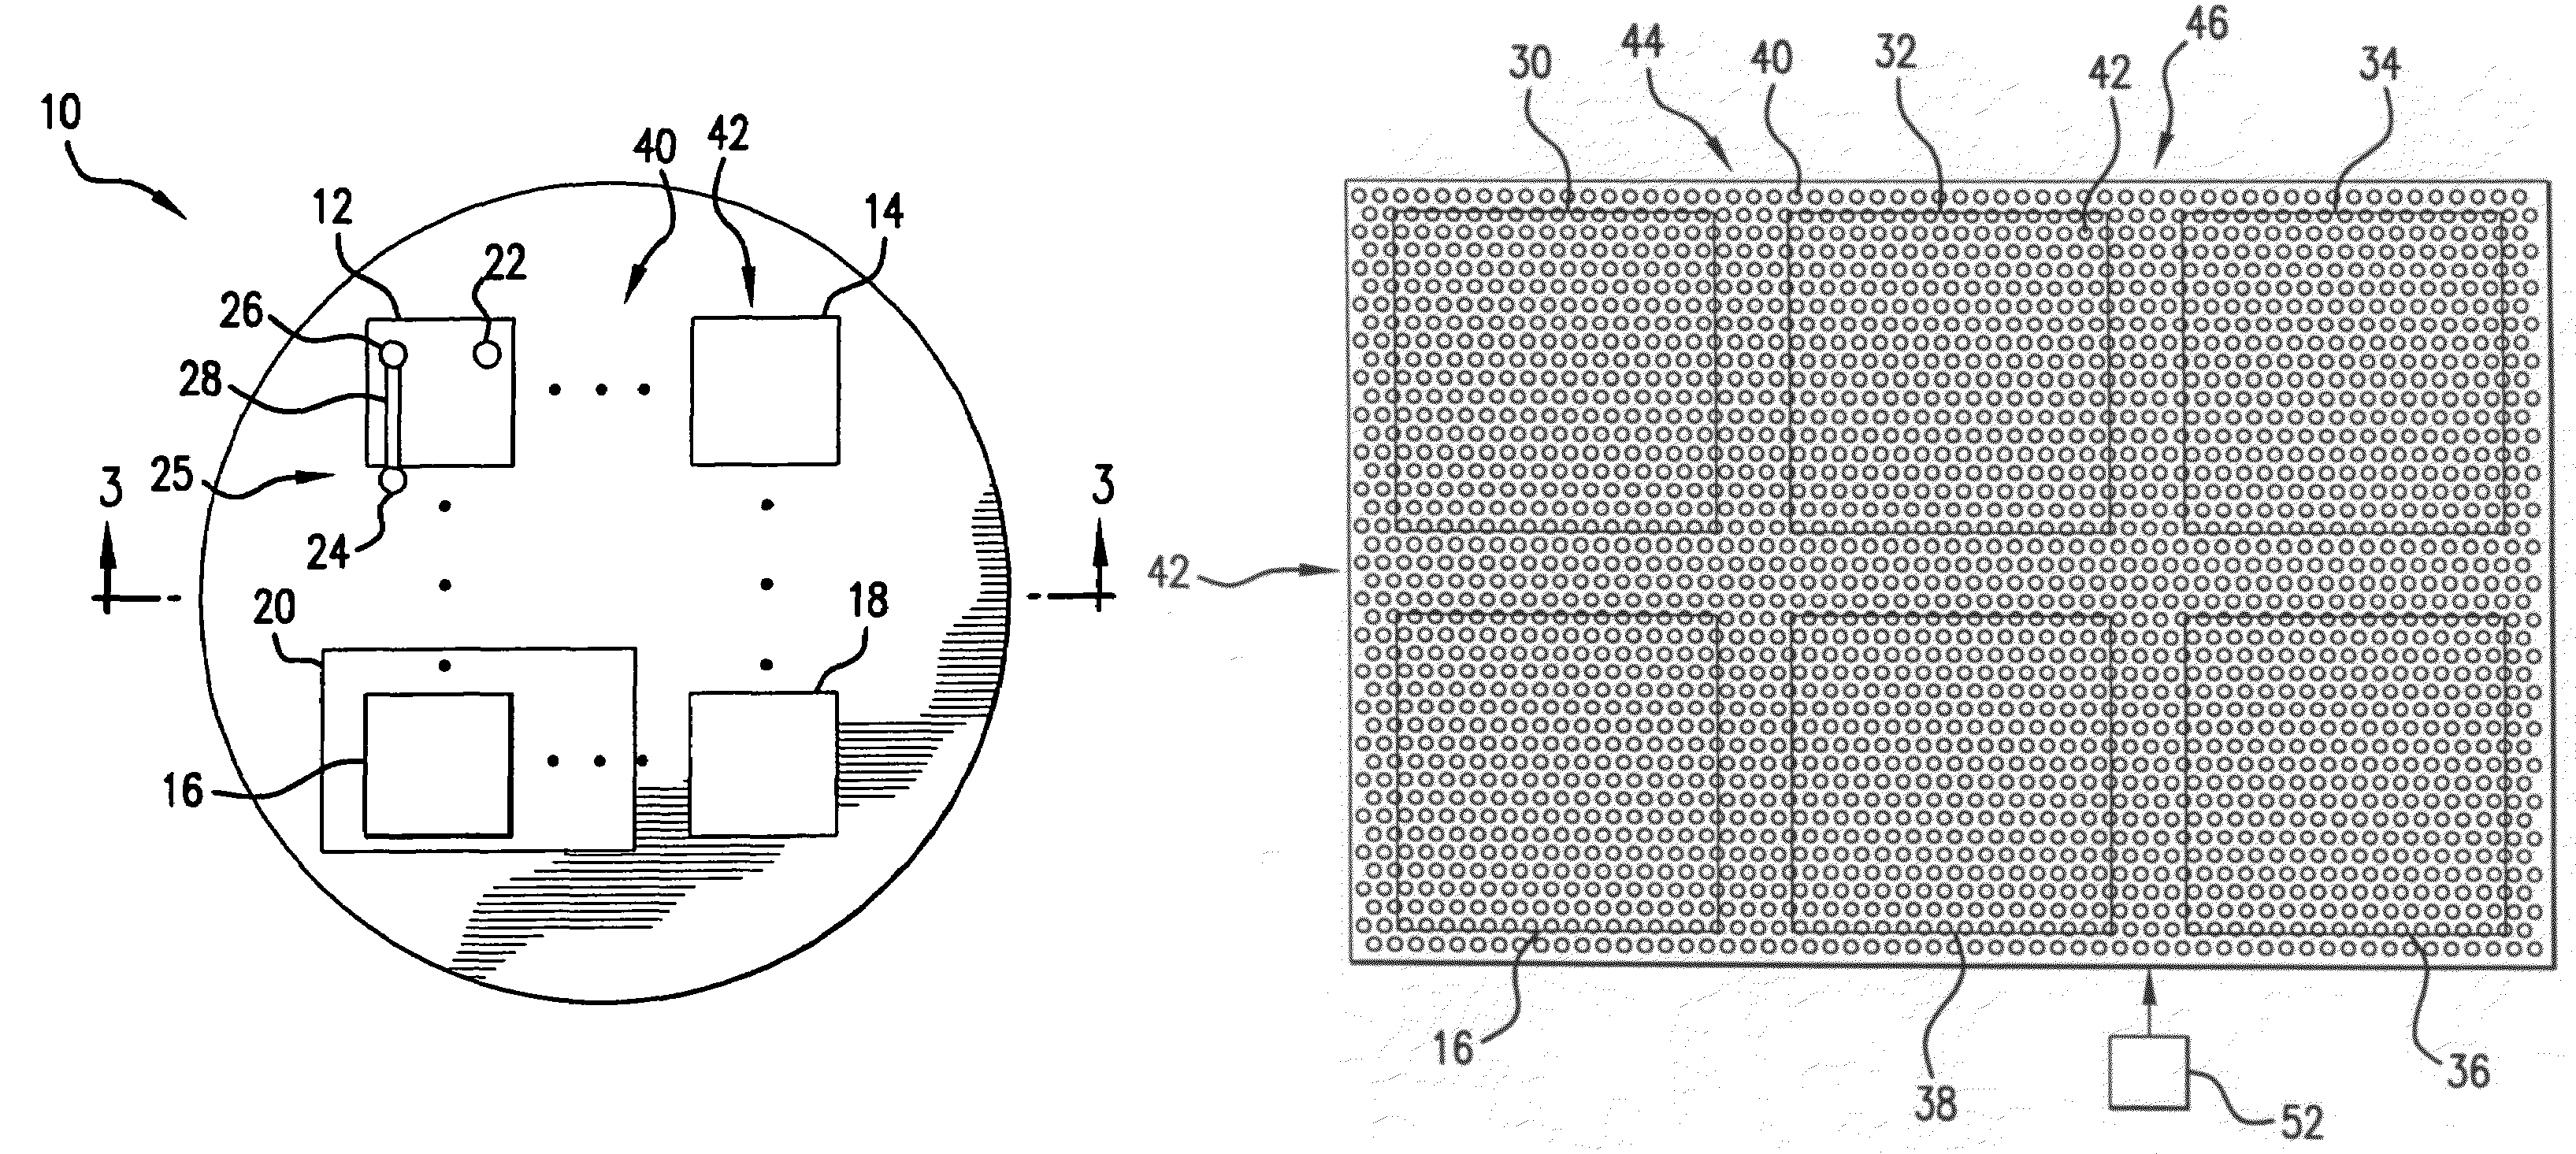 Deposition pattern for eliminating backside metal peeling during die separation in semiconductor device fabrication